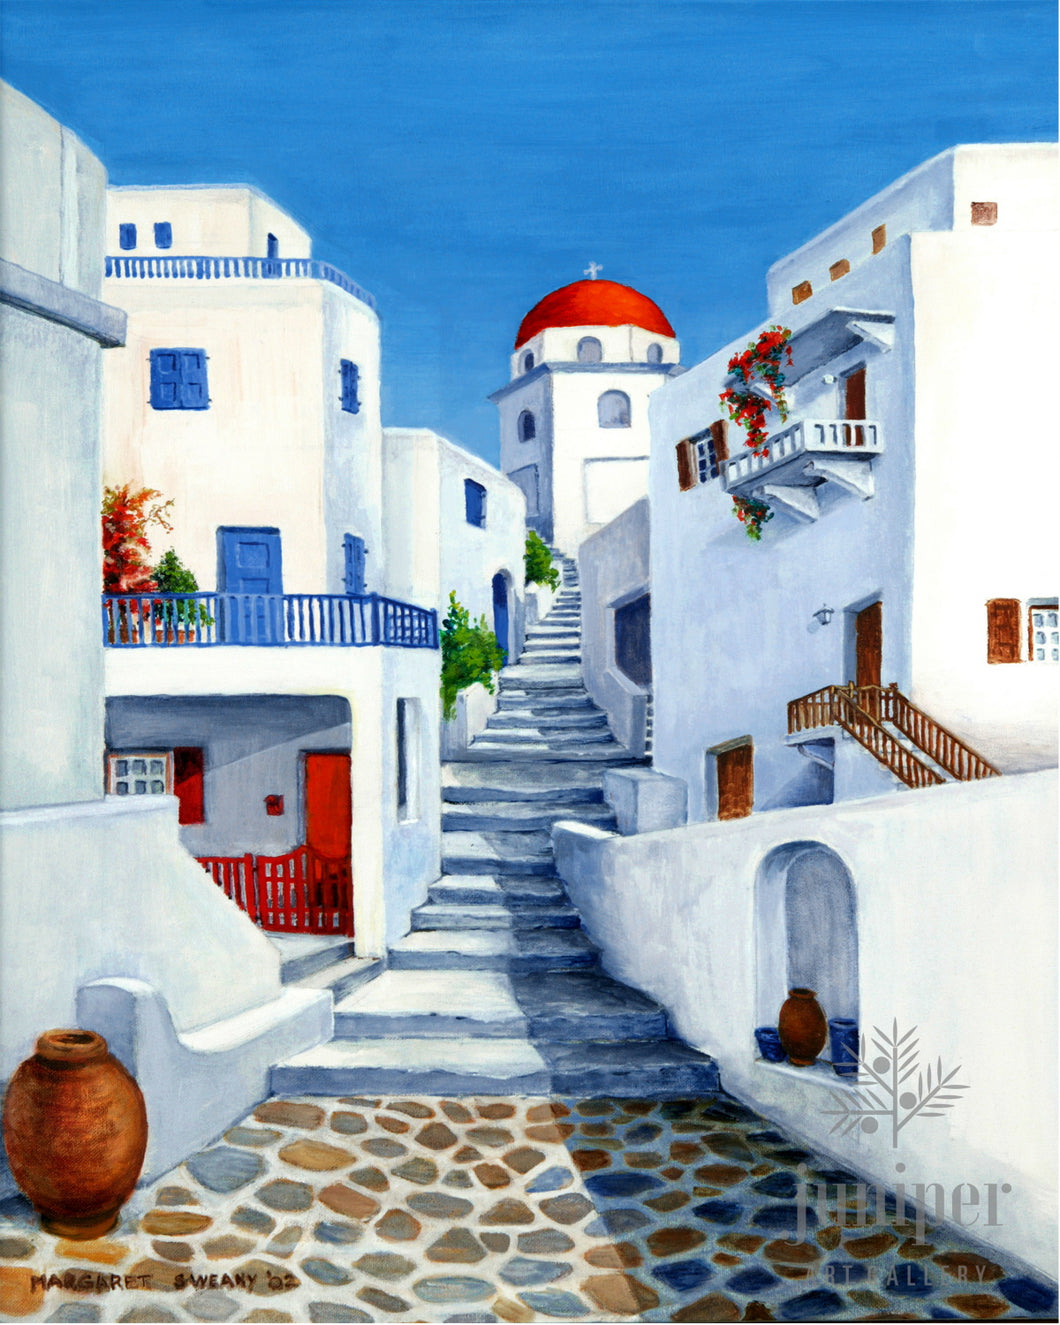 Greek Island Village, reproduction from original oil by Margaret L. Sweany